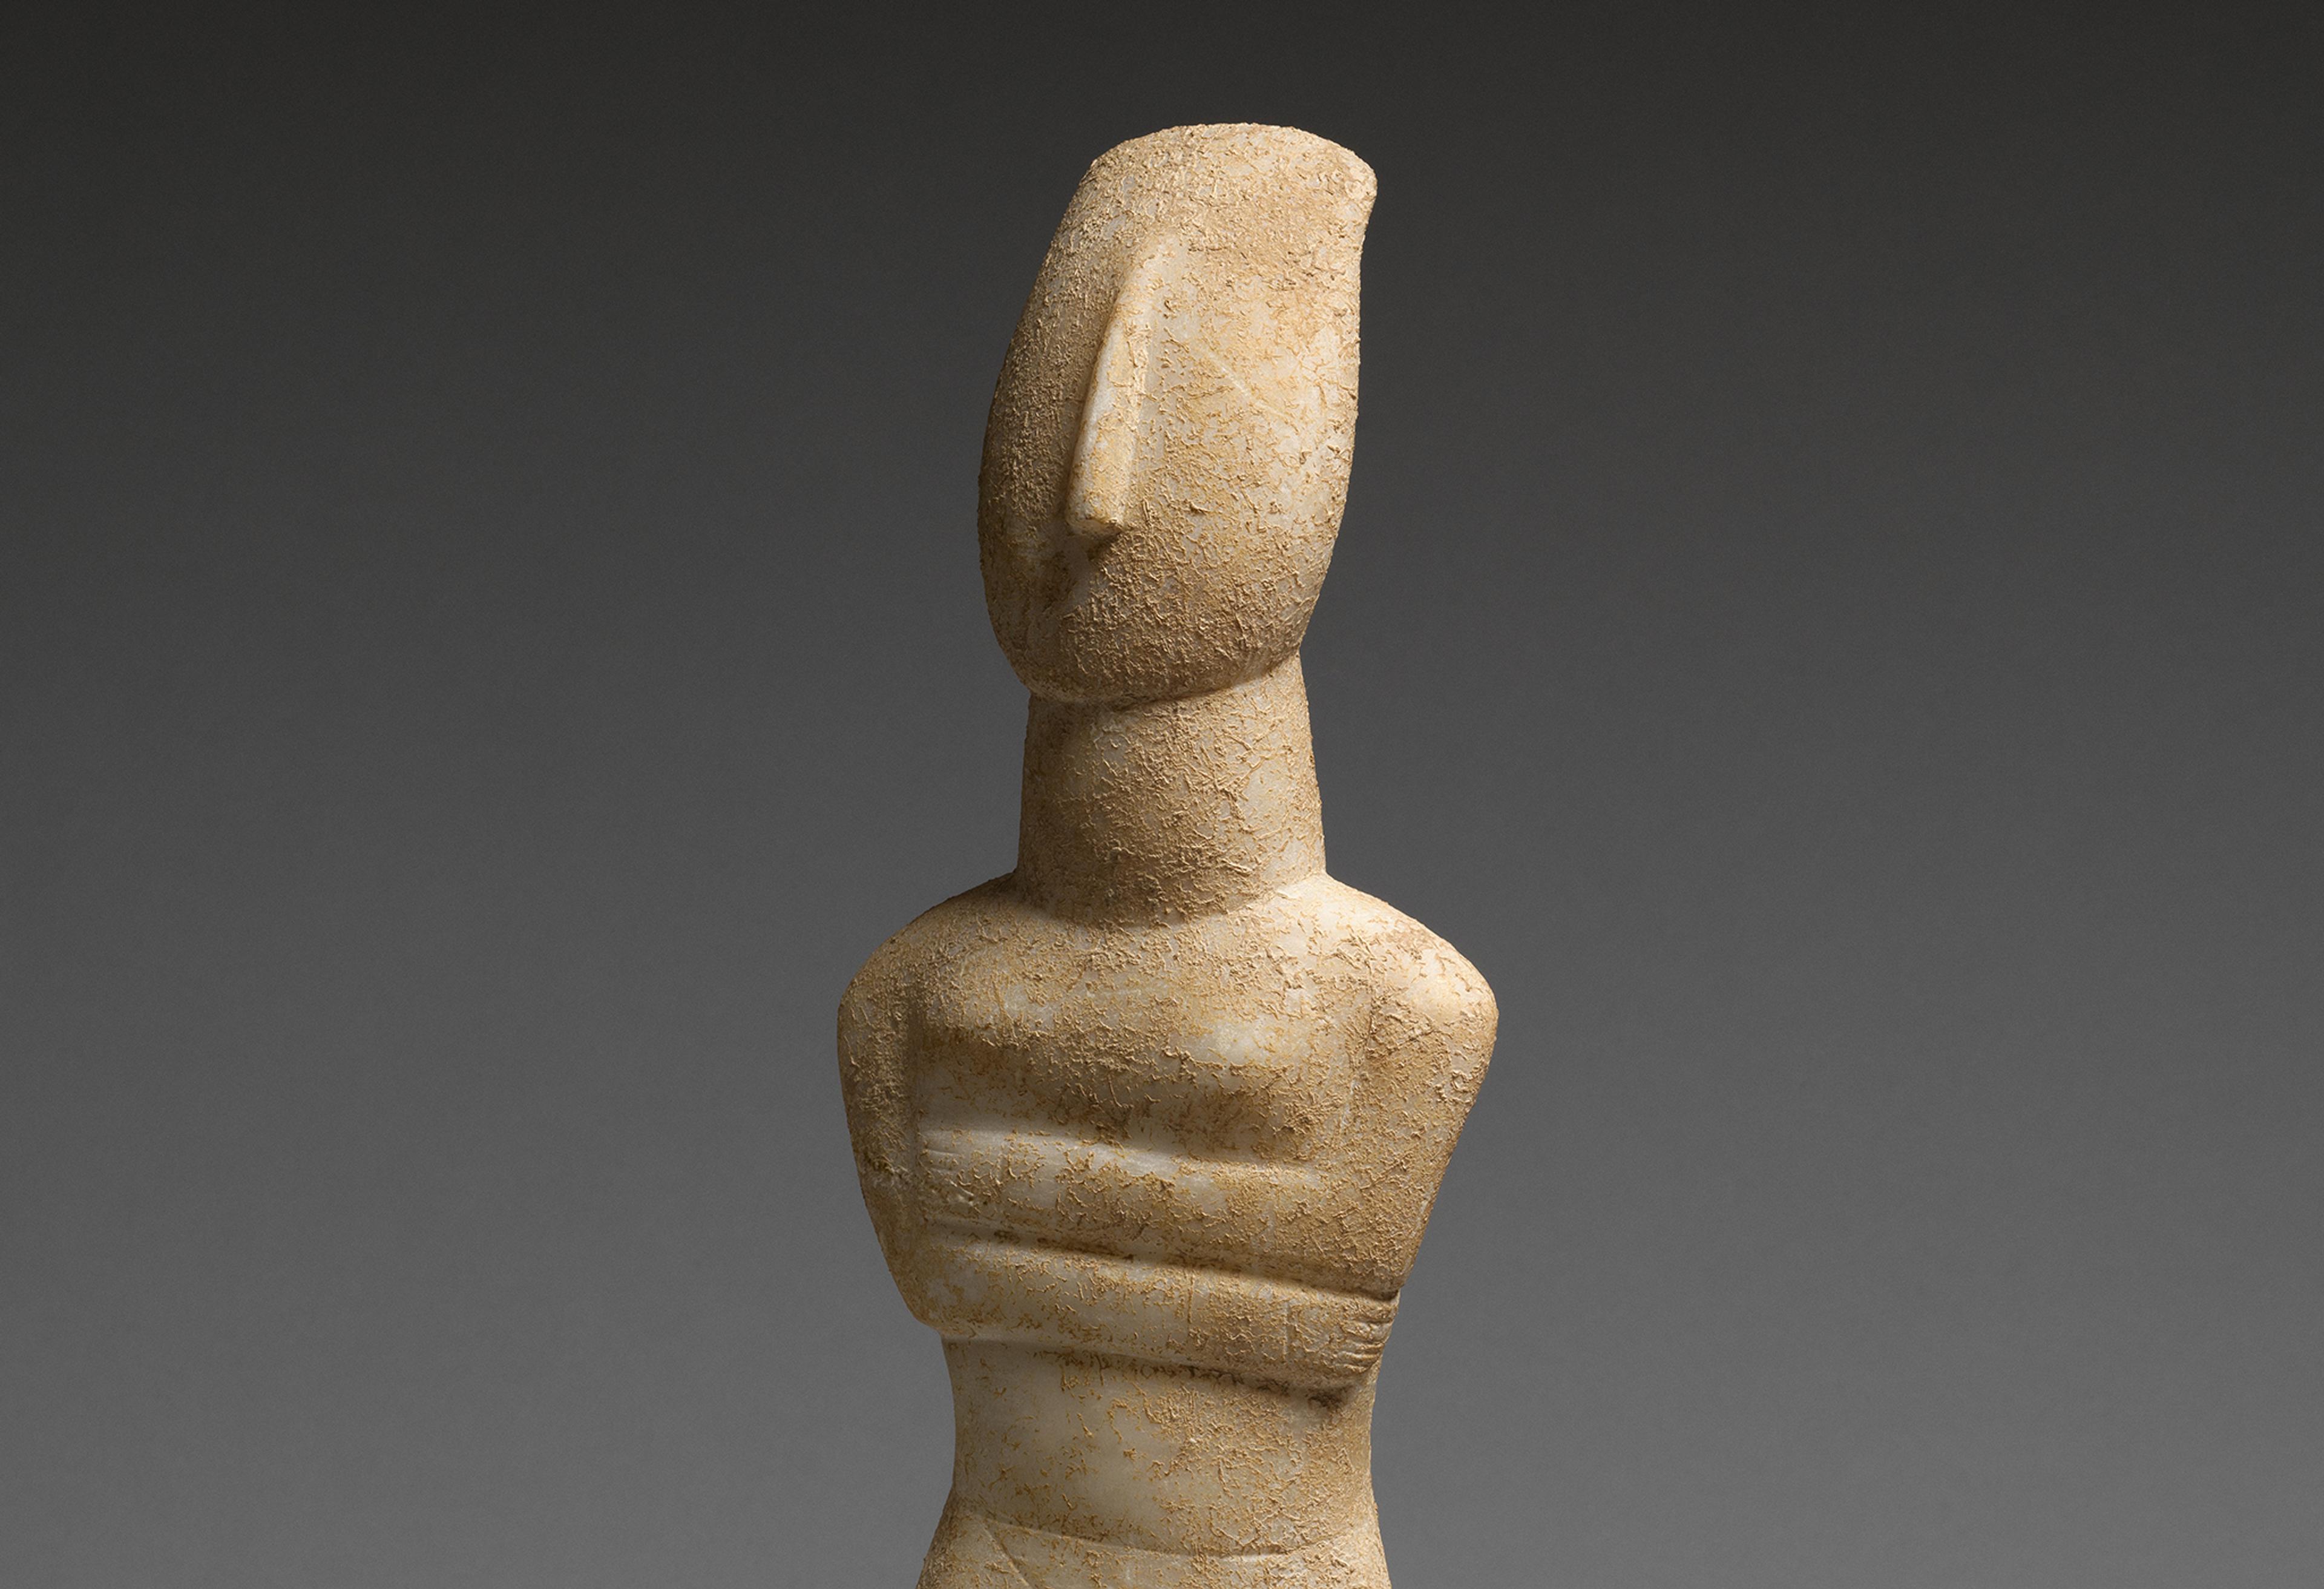 Nude stone Cycladic figure with arms crossed against a grey background.